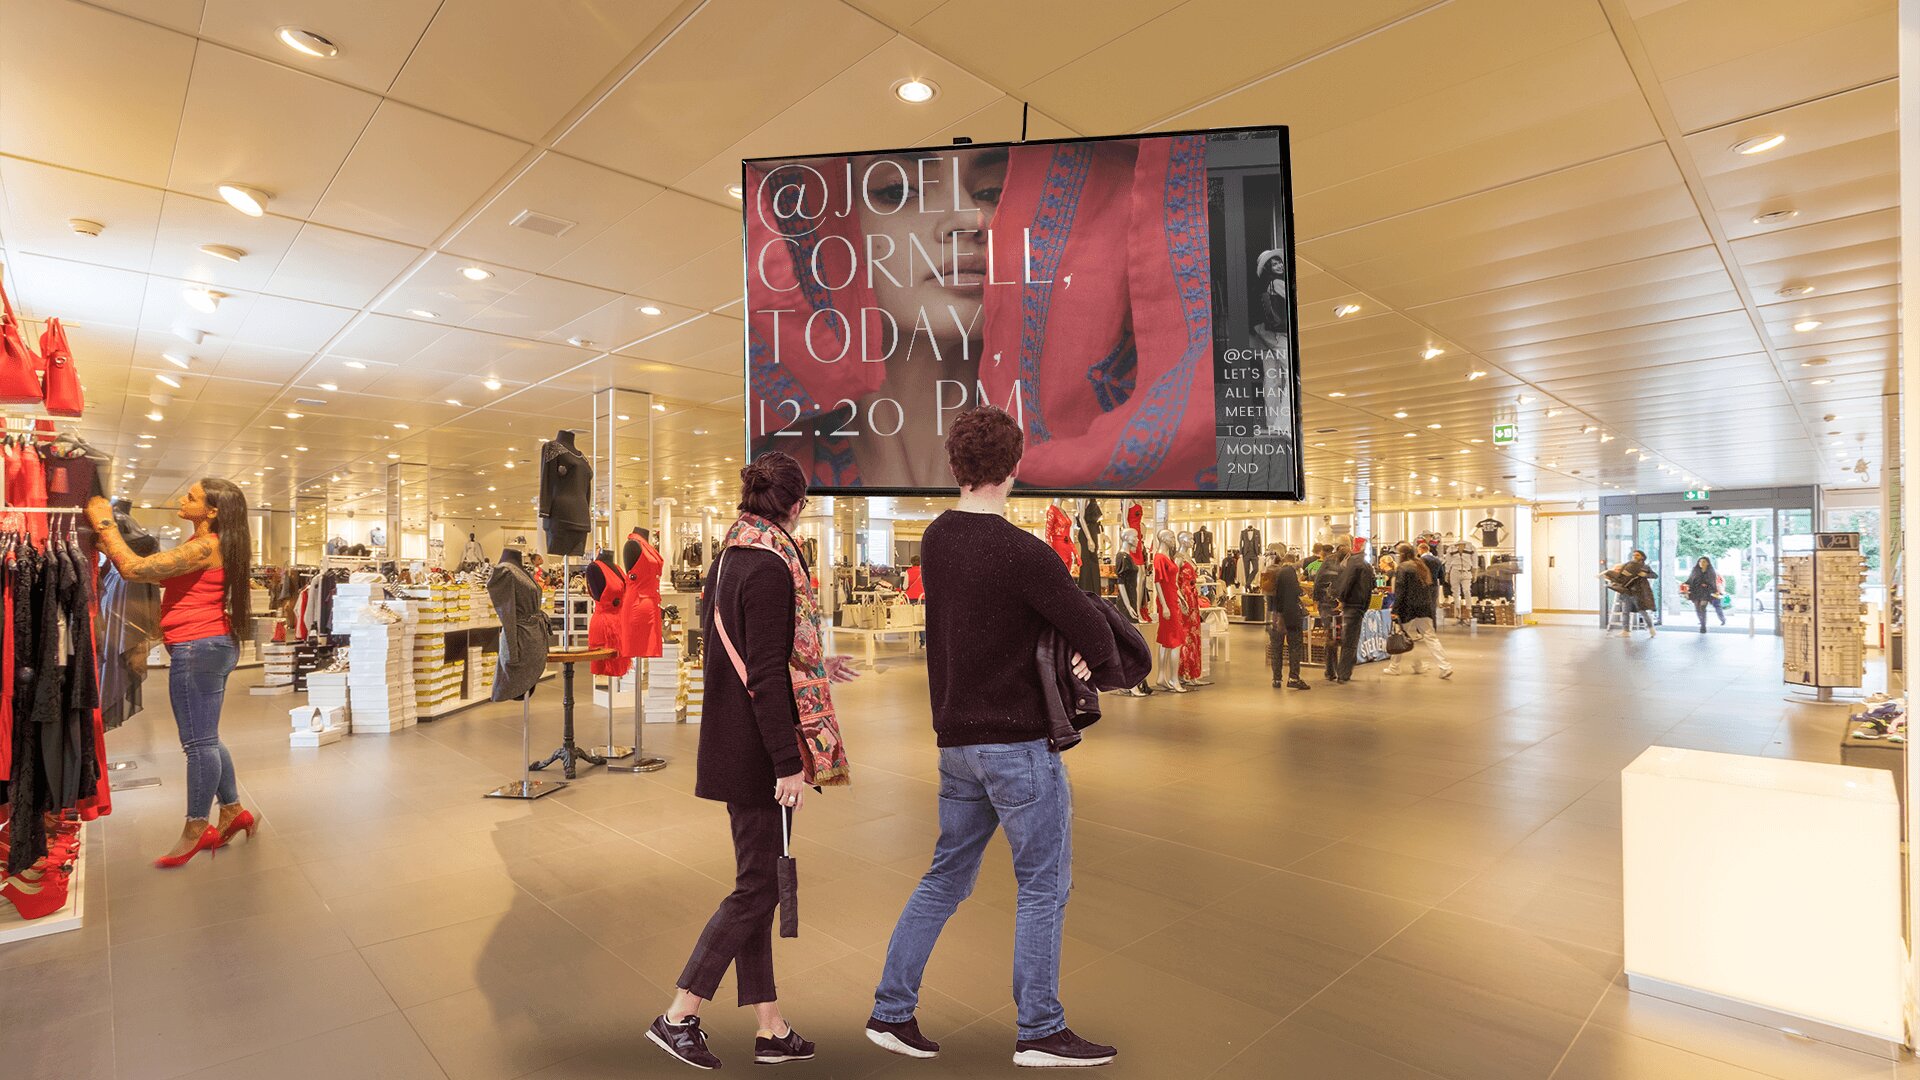 Two shoppers gaze at a video ad playing on the digital signage display installed inside a retail clothing store.